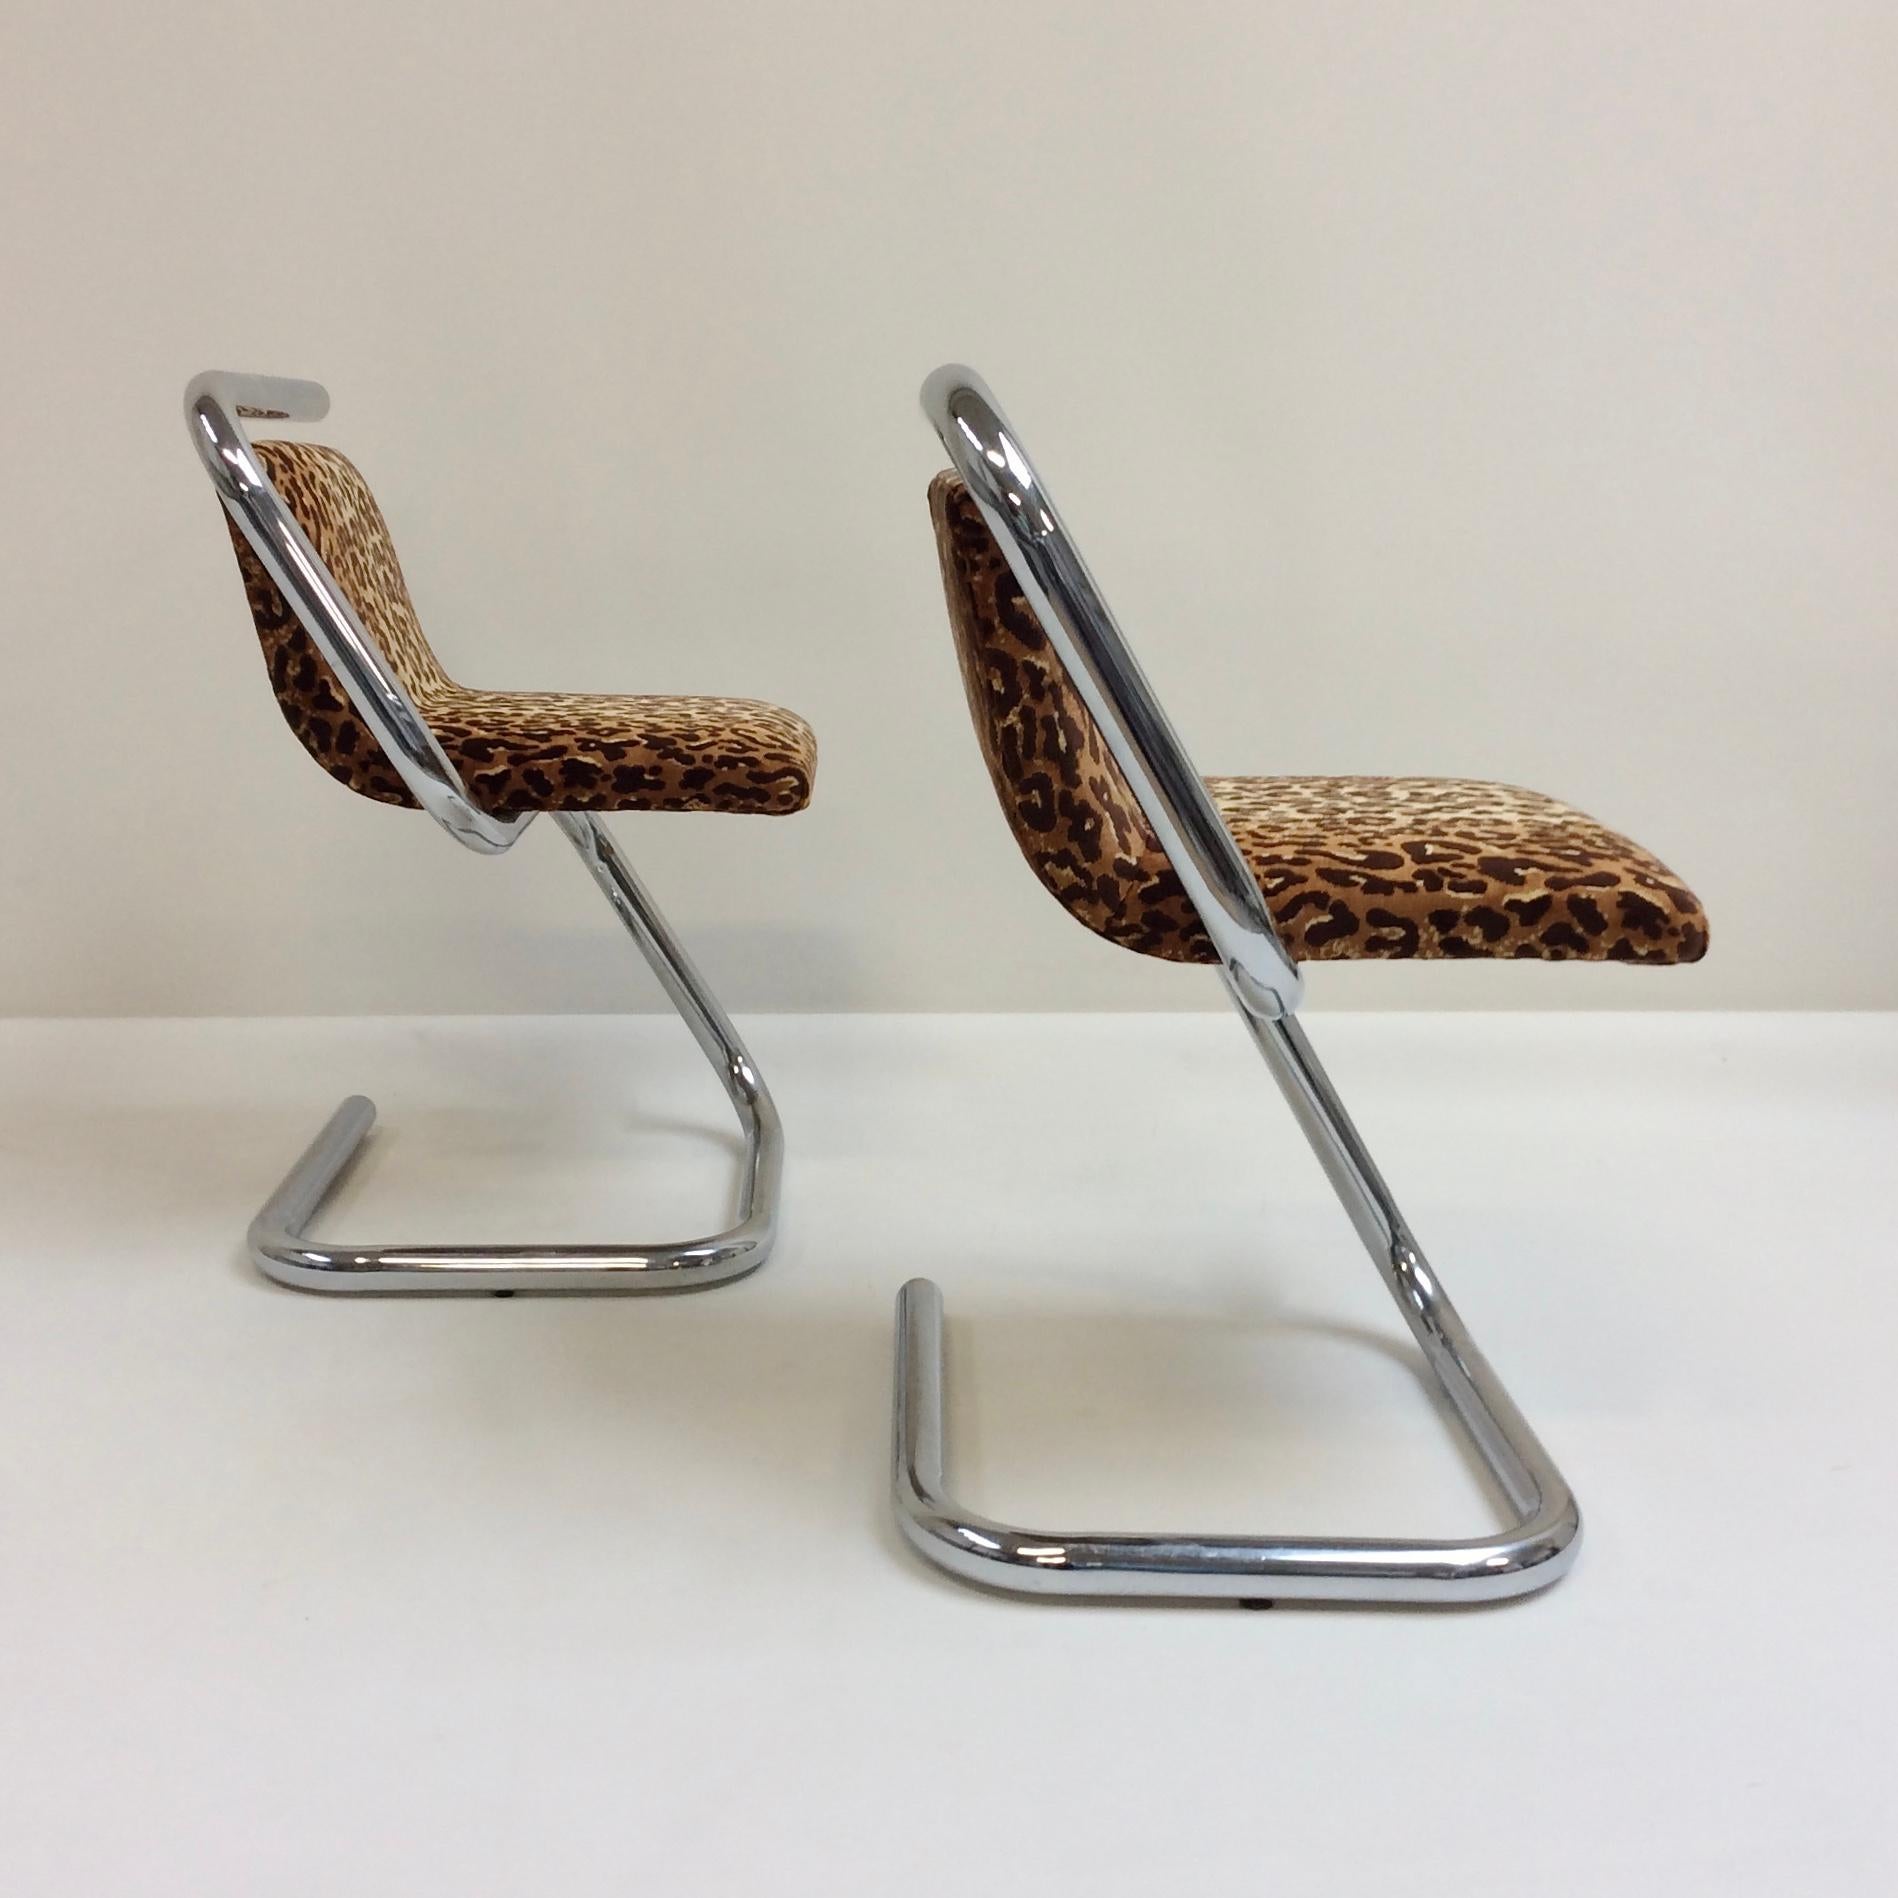 French Pair of Mid-Century Modern Chairs, Chrome & Leopard Fabric, circa 1970, Italy